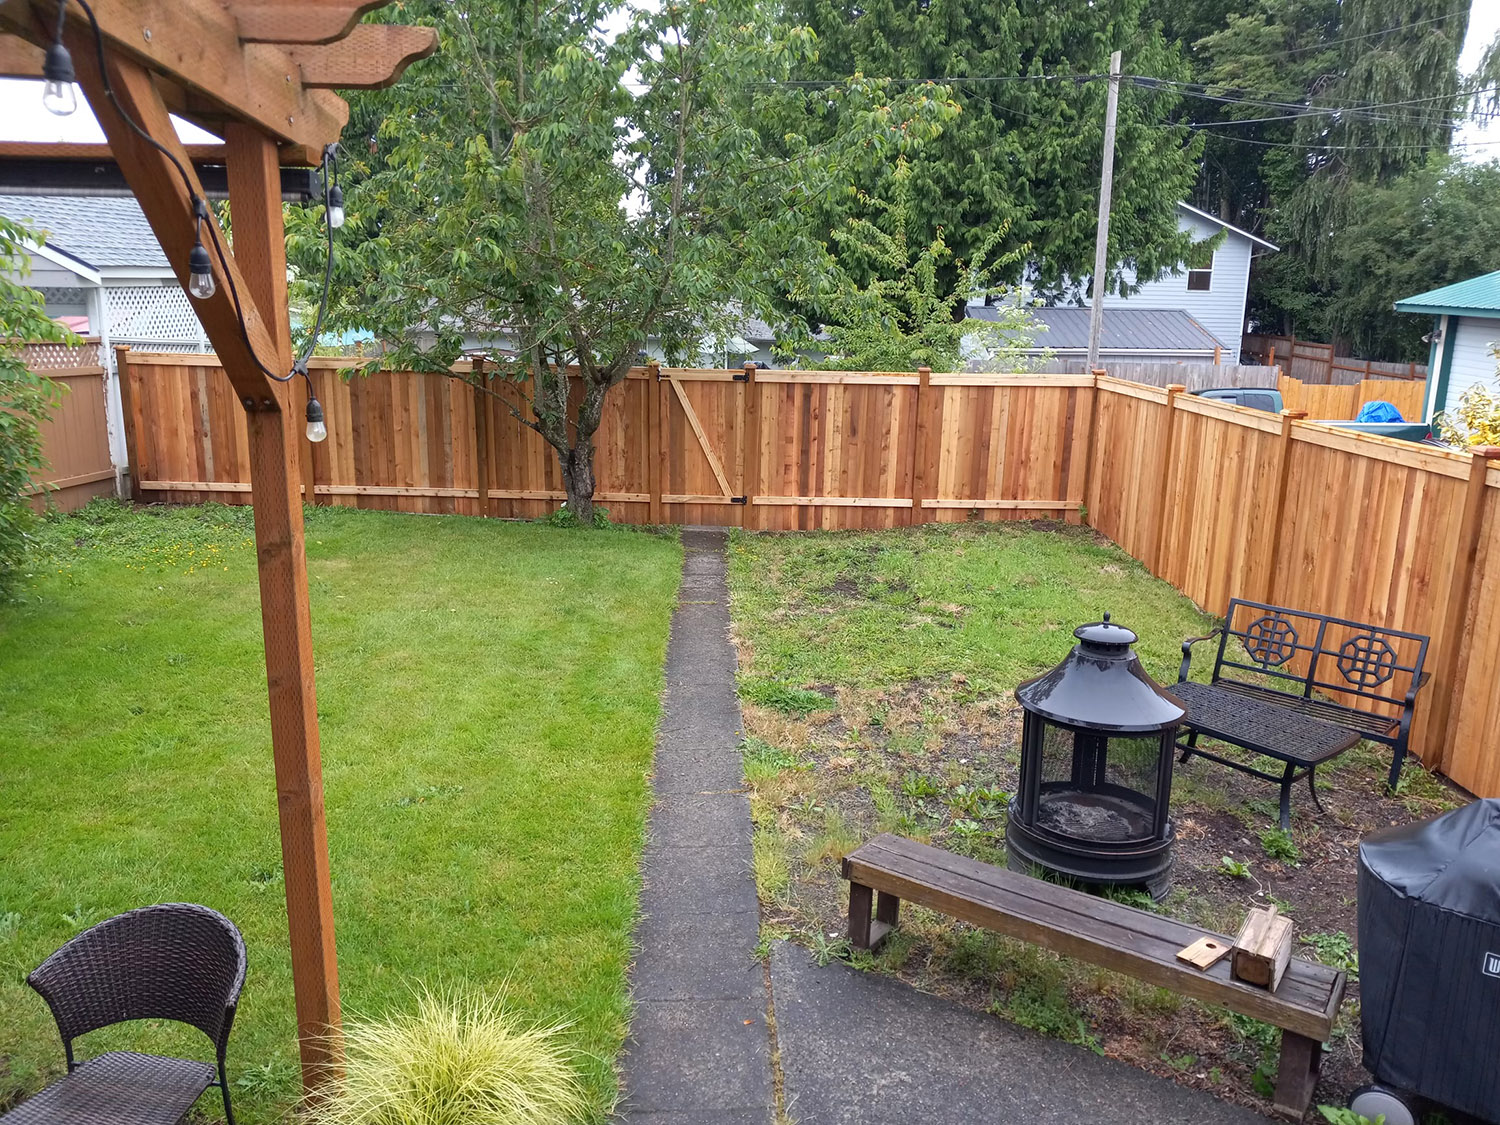 Photo of a backyard with weeds and a walkway.